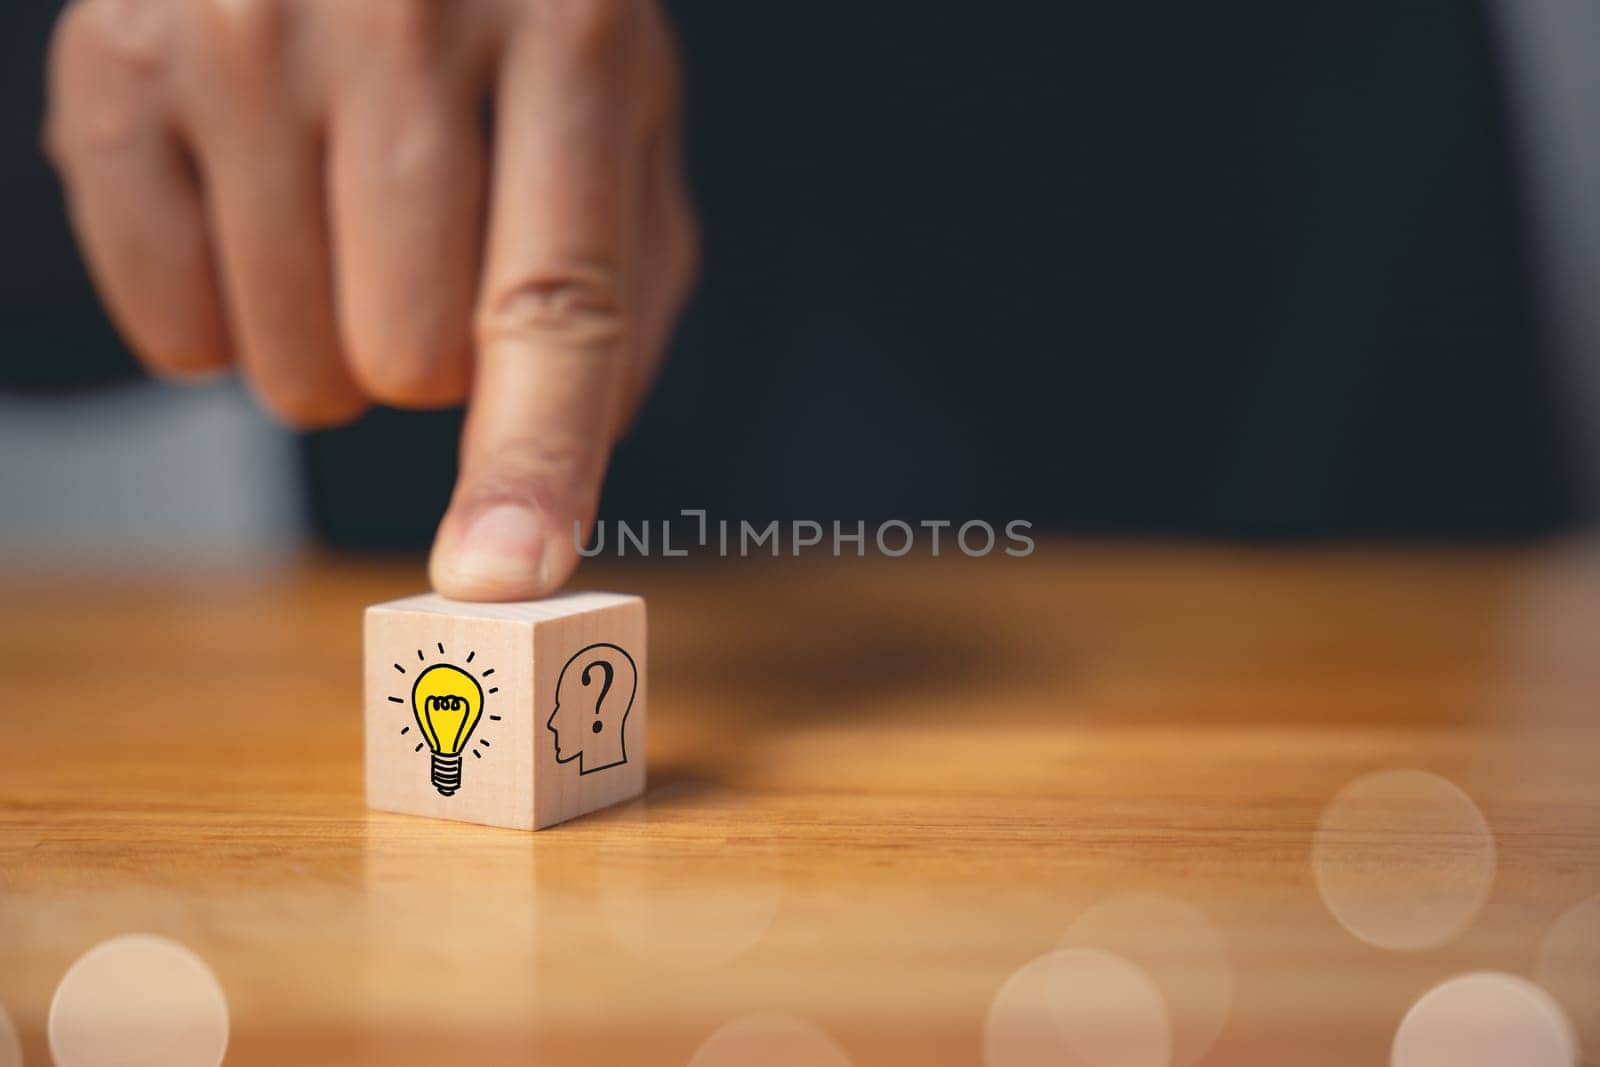 Expert consulting and creative solution concept. Hand holding wooden block with glowing light bulb icon. Development of new ideas and innovation strategy. Business success through creative imagination